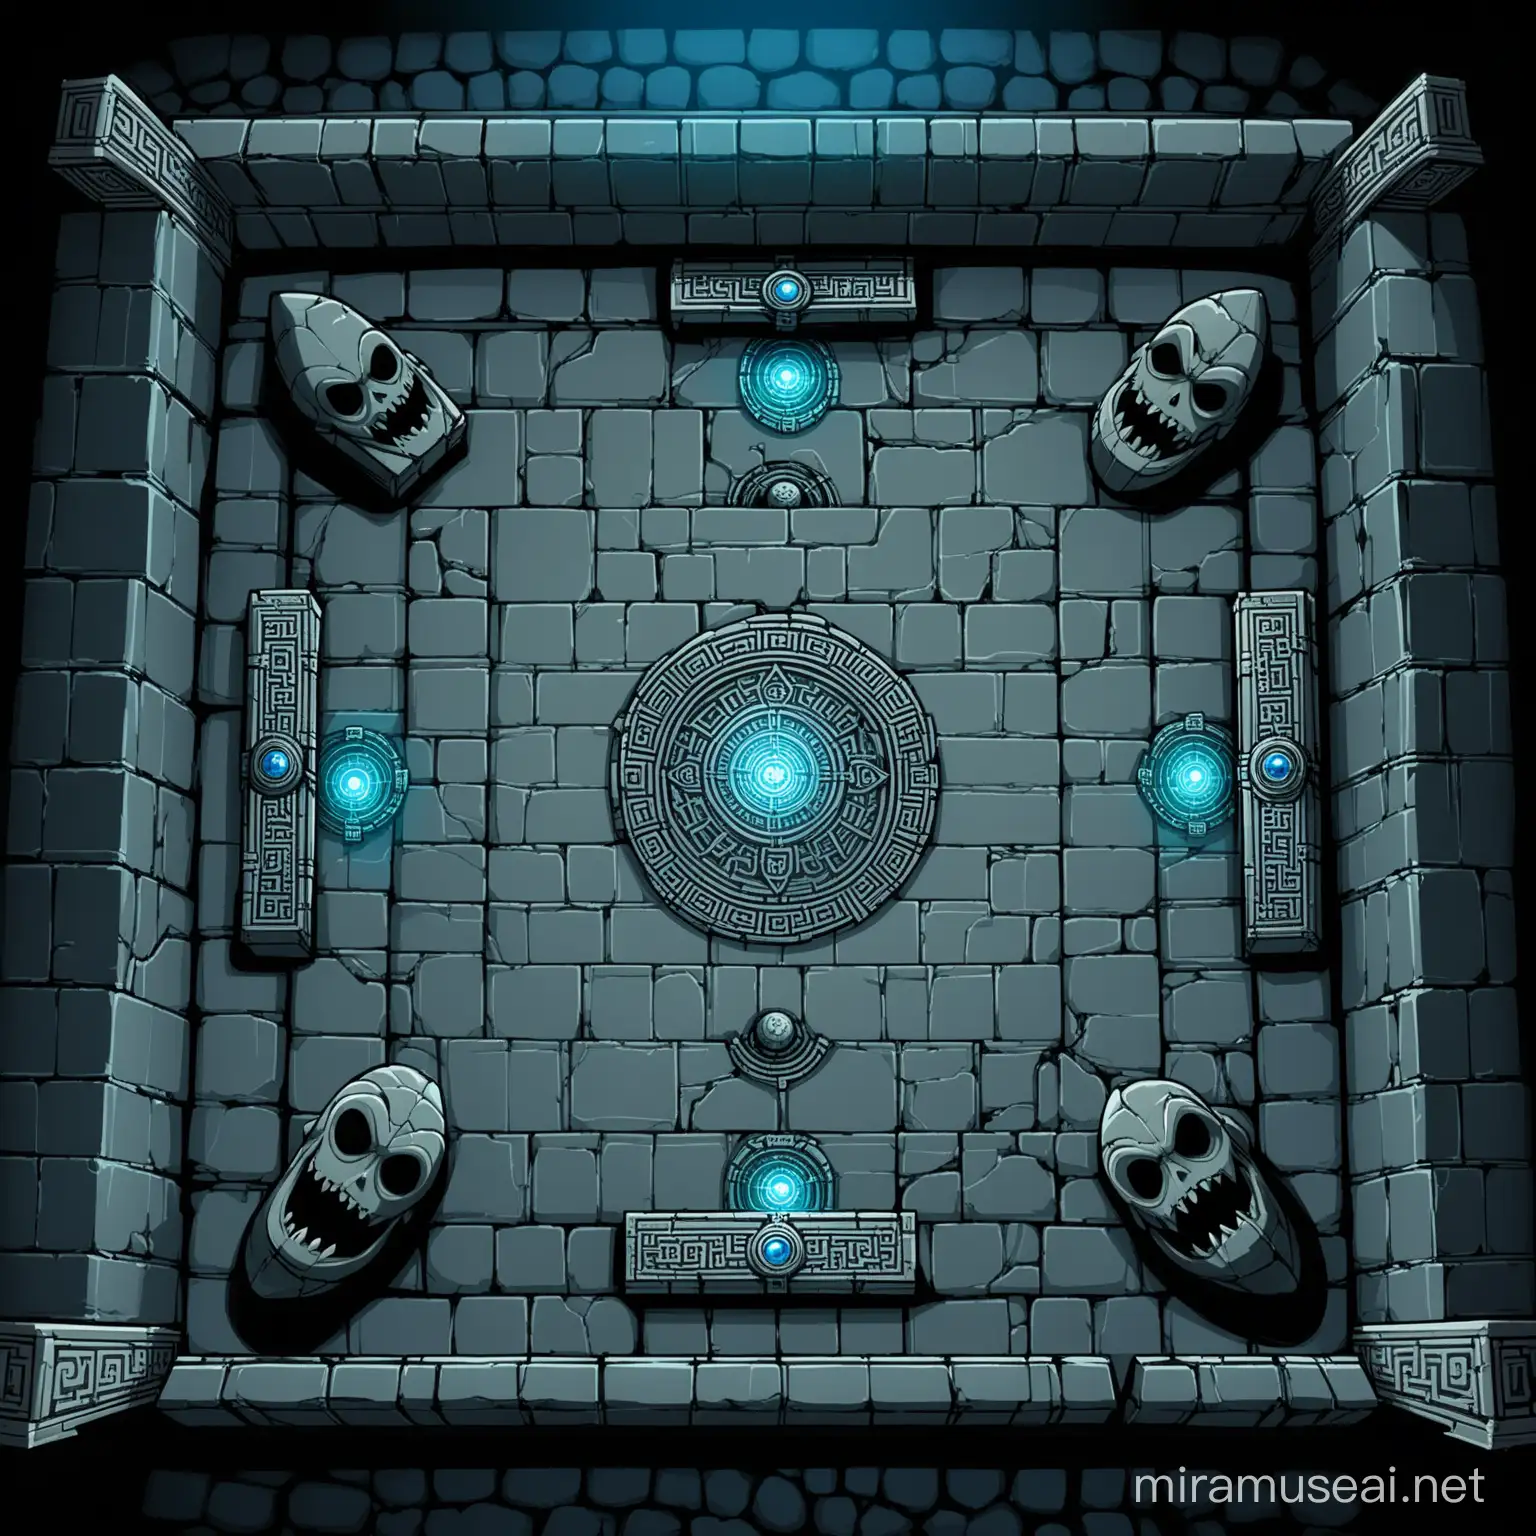 An overhead game map of a dimly-lit sacred chamber containing a stone plinth with an ornate tome placed atop it. The temple chamber is grey stone and has spooky mouths carved into the walls